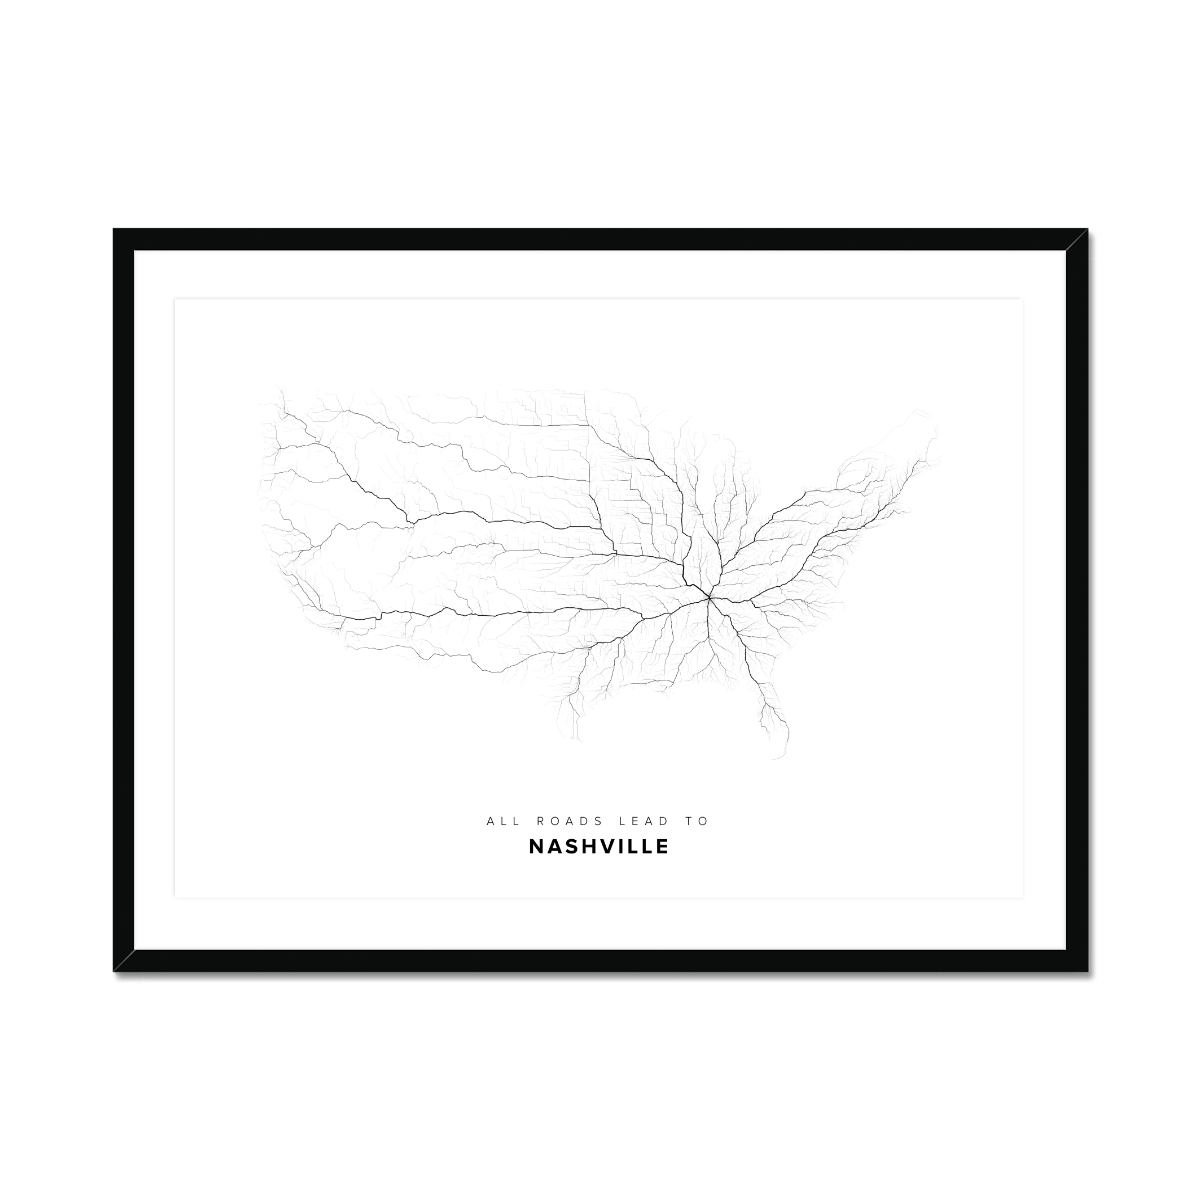 All roads lead to Nashville (United States of America) Fine Art Map Print